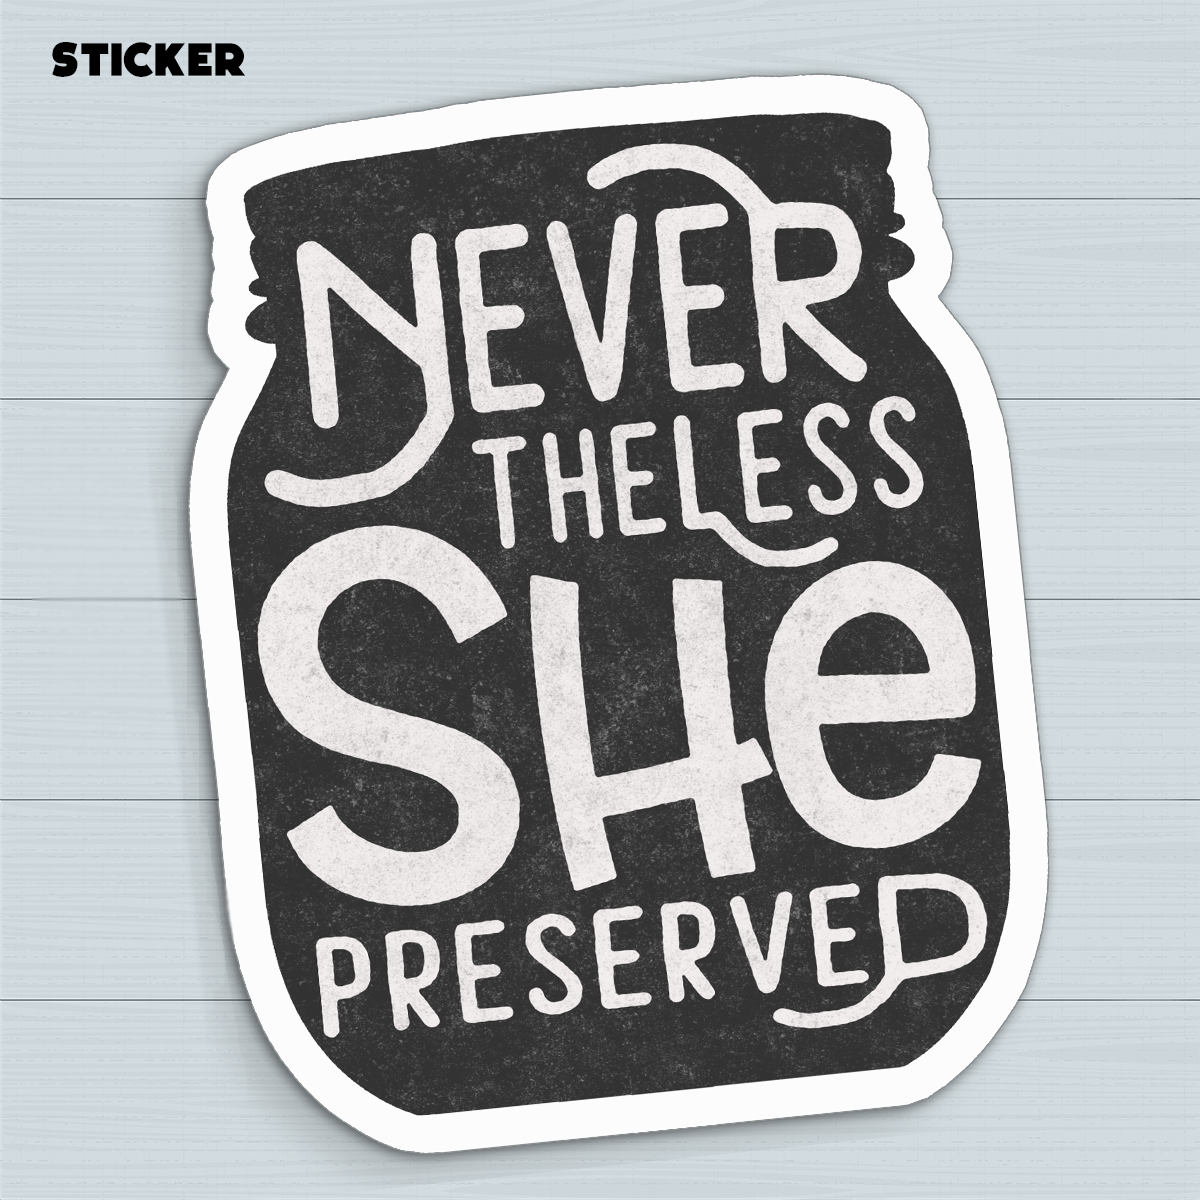 Never the less she preserved Nevertheless She Preserved Sticker by The Purposeful Pantry.